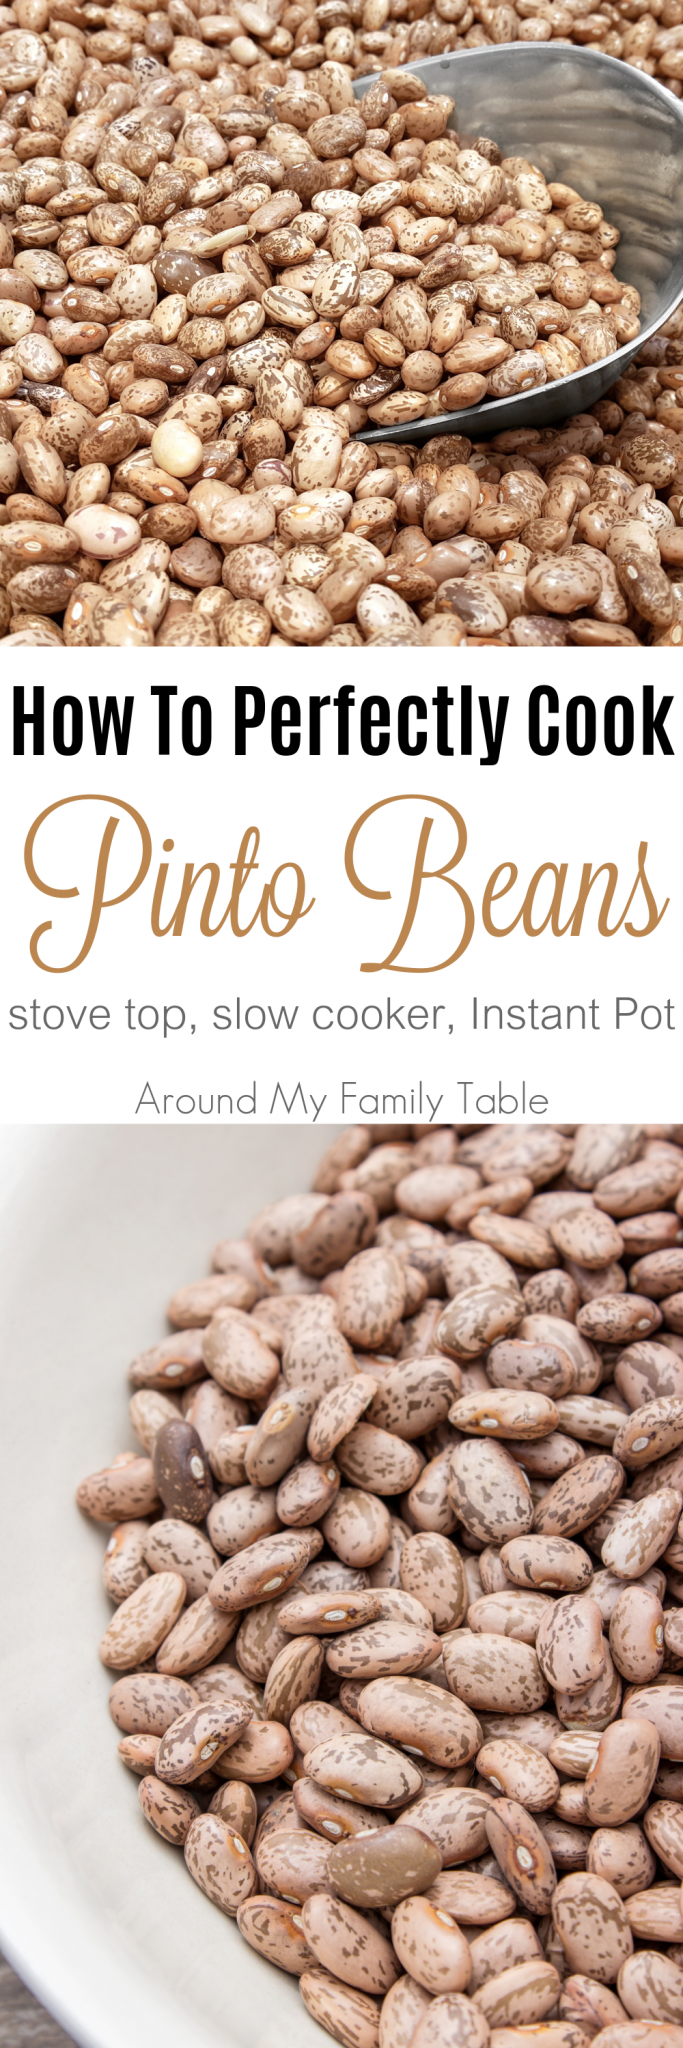 Everything you’ve wanted to know about Pinto Beans. This How to Cook Pinto Beans guide features instructions on using a slow cooker, Instant Pot, and stovetop for cooking pinto beans, plus there are a few delicious recipes to try as well. #pintobeans #driedbeans #howtocook #slowcooker #pressurecooker #instantpot #crockpot #beans via @slingmama